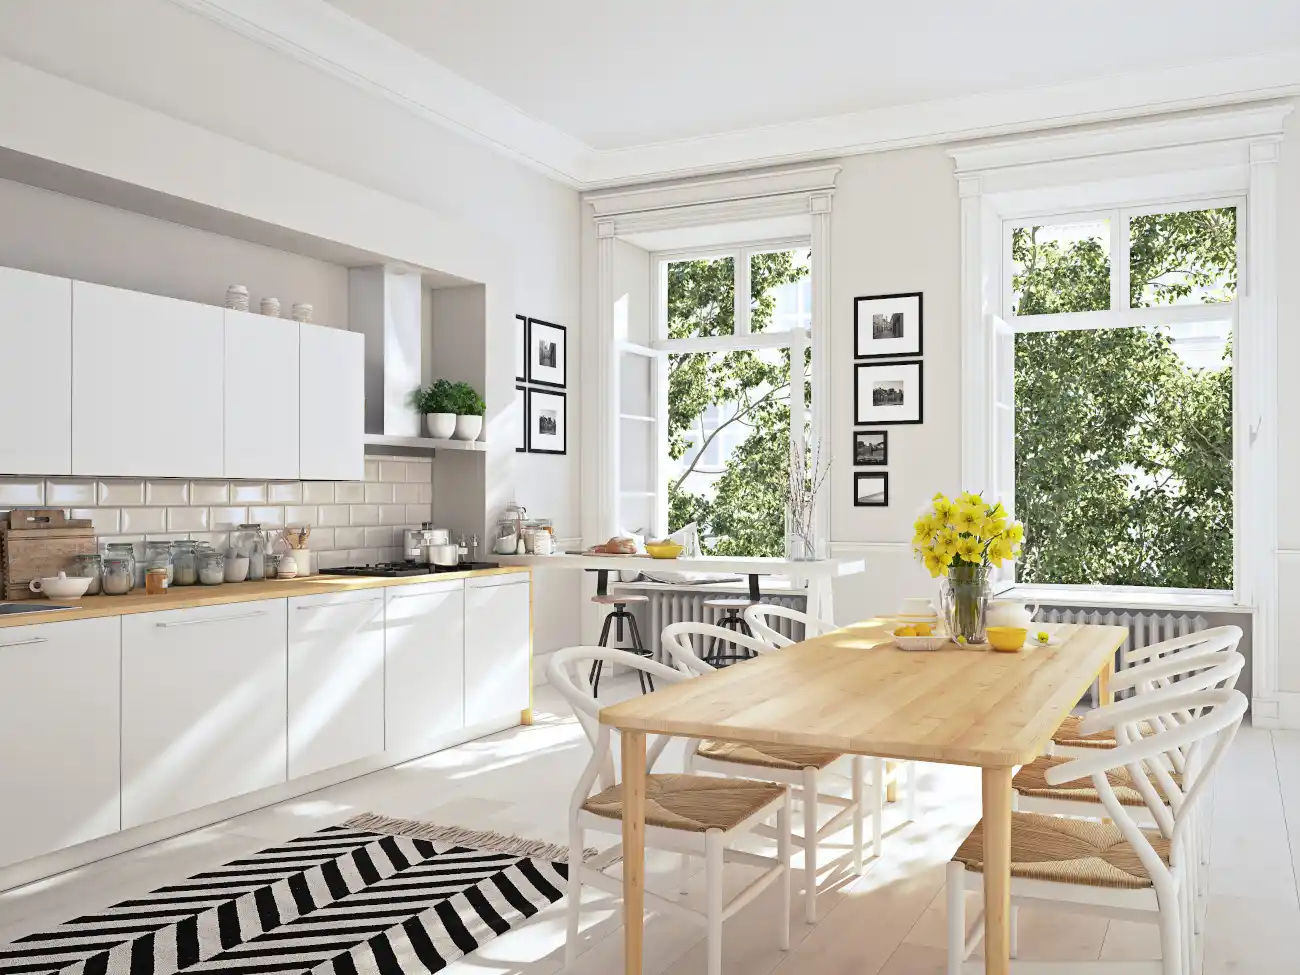 5 Kitchen Remodel Trends That Will Save You Big in 2023